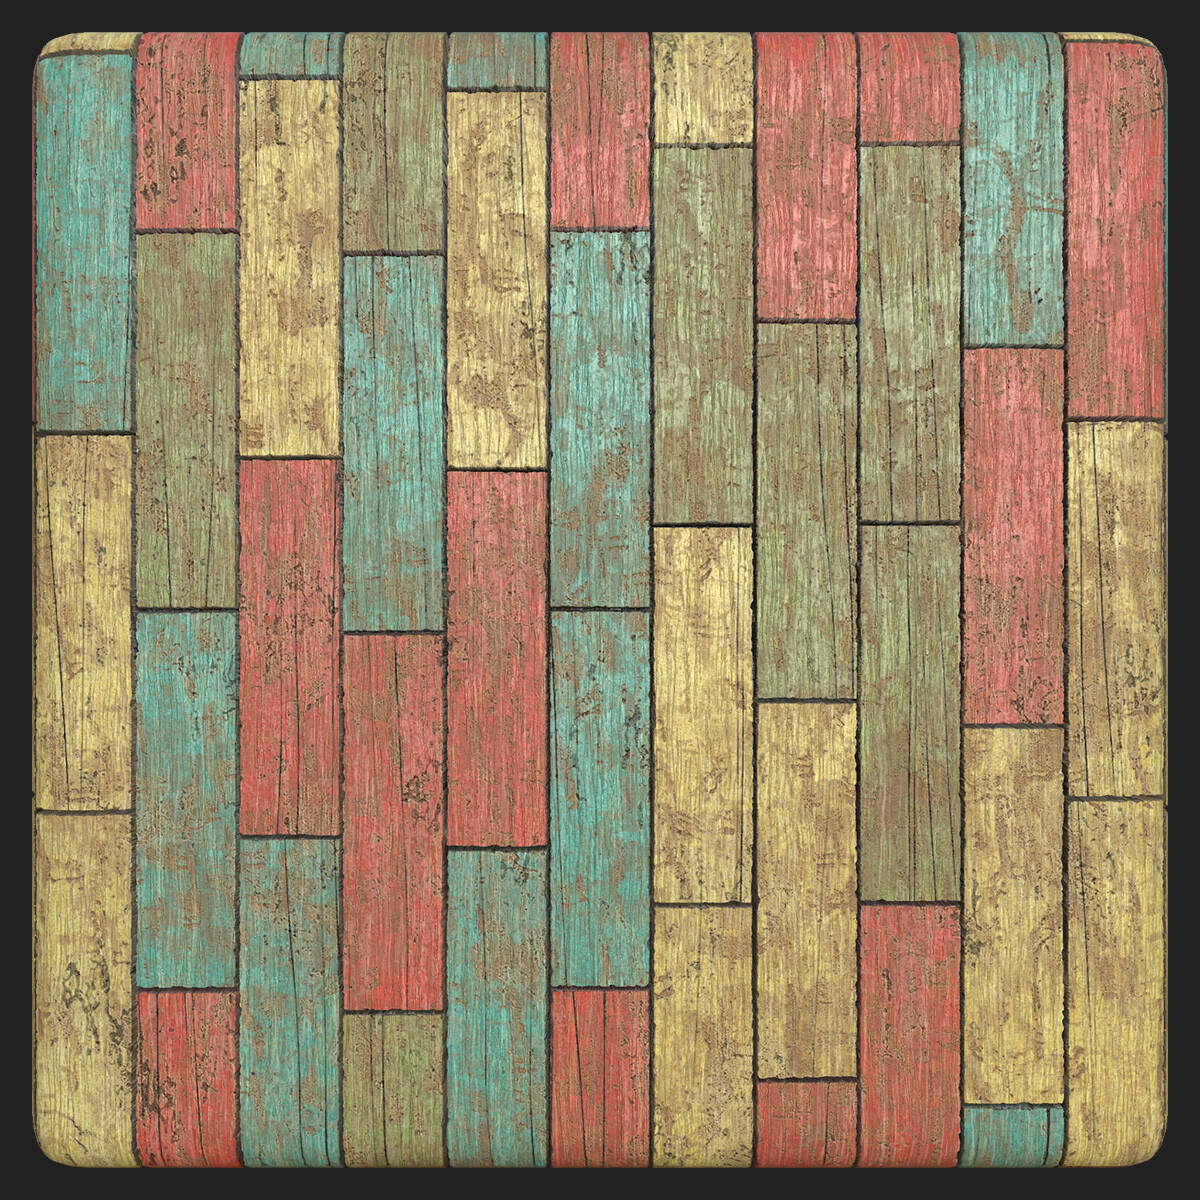 TextureCan - Colorful Painted Wood Planks (FREE PBR Texture)